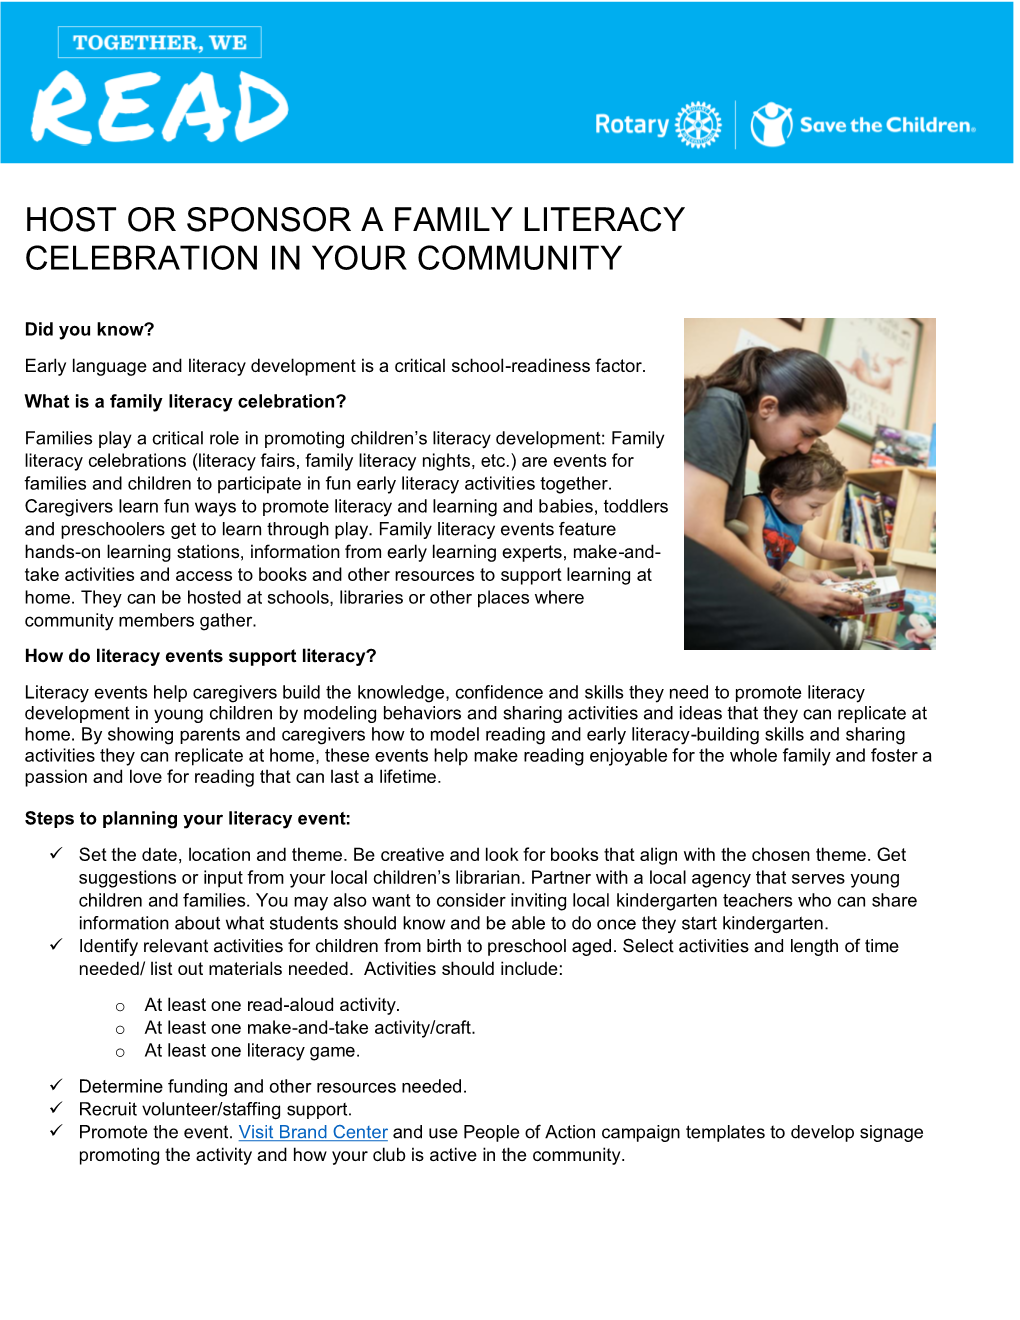 Host Or Sponsor a Family Literacy Celebration in Your Community